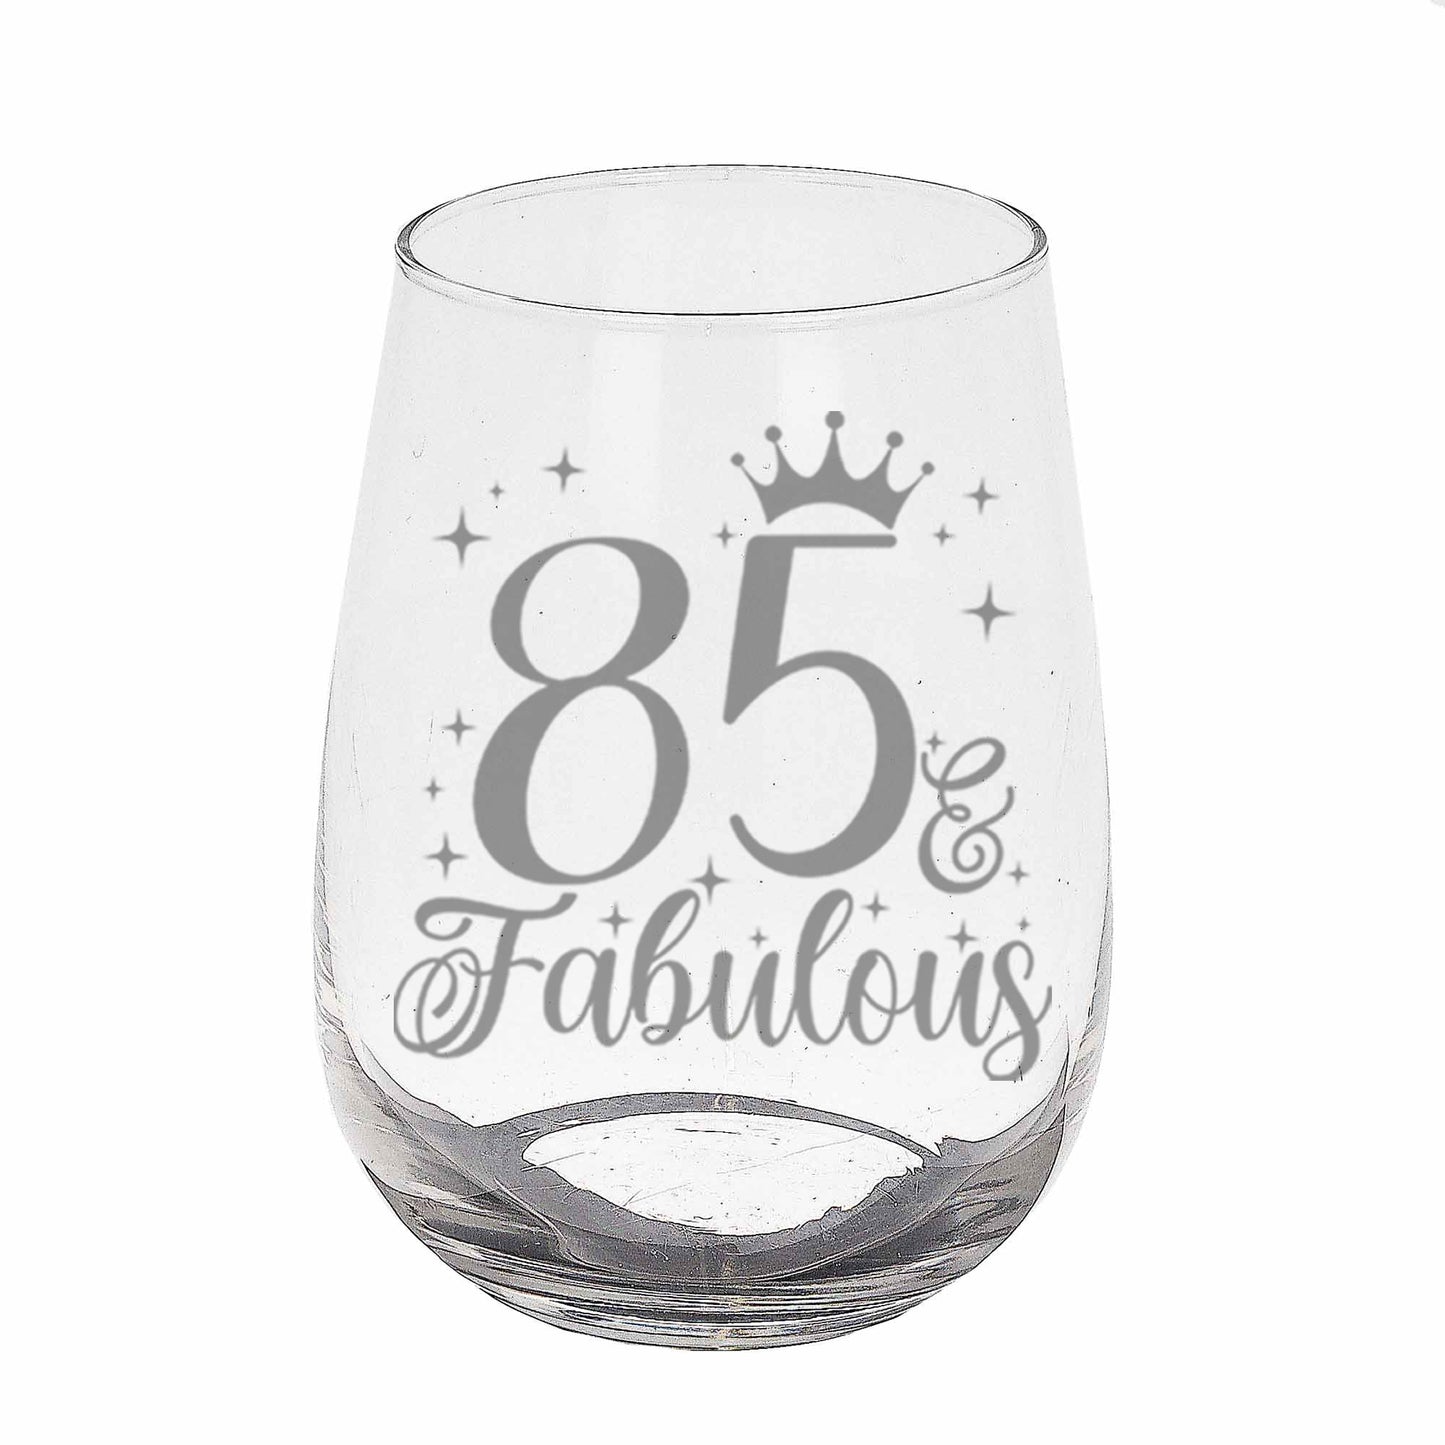 85 & Fabulous Engraved Stemless Gin Glass and/or Coaster Set  - Always Looking Good - Stemless Gin Glass On Its Own  